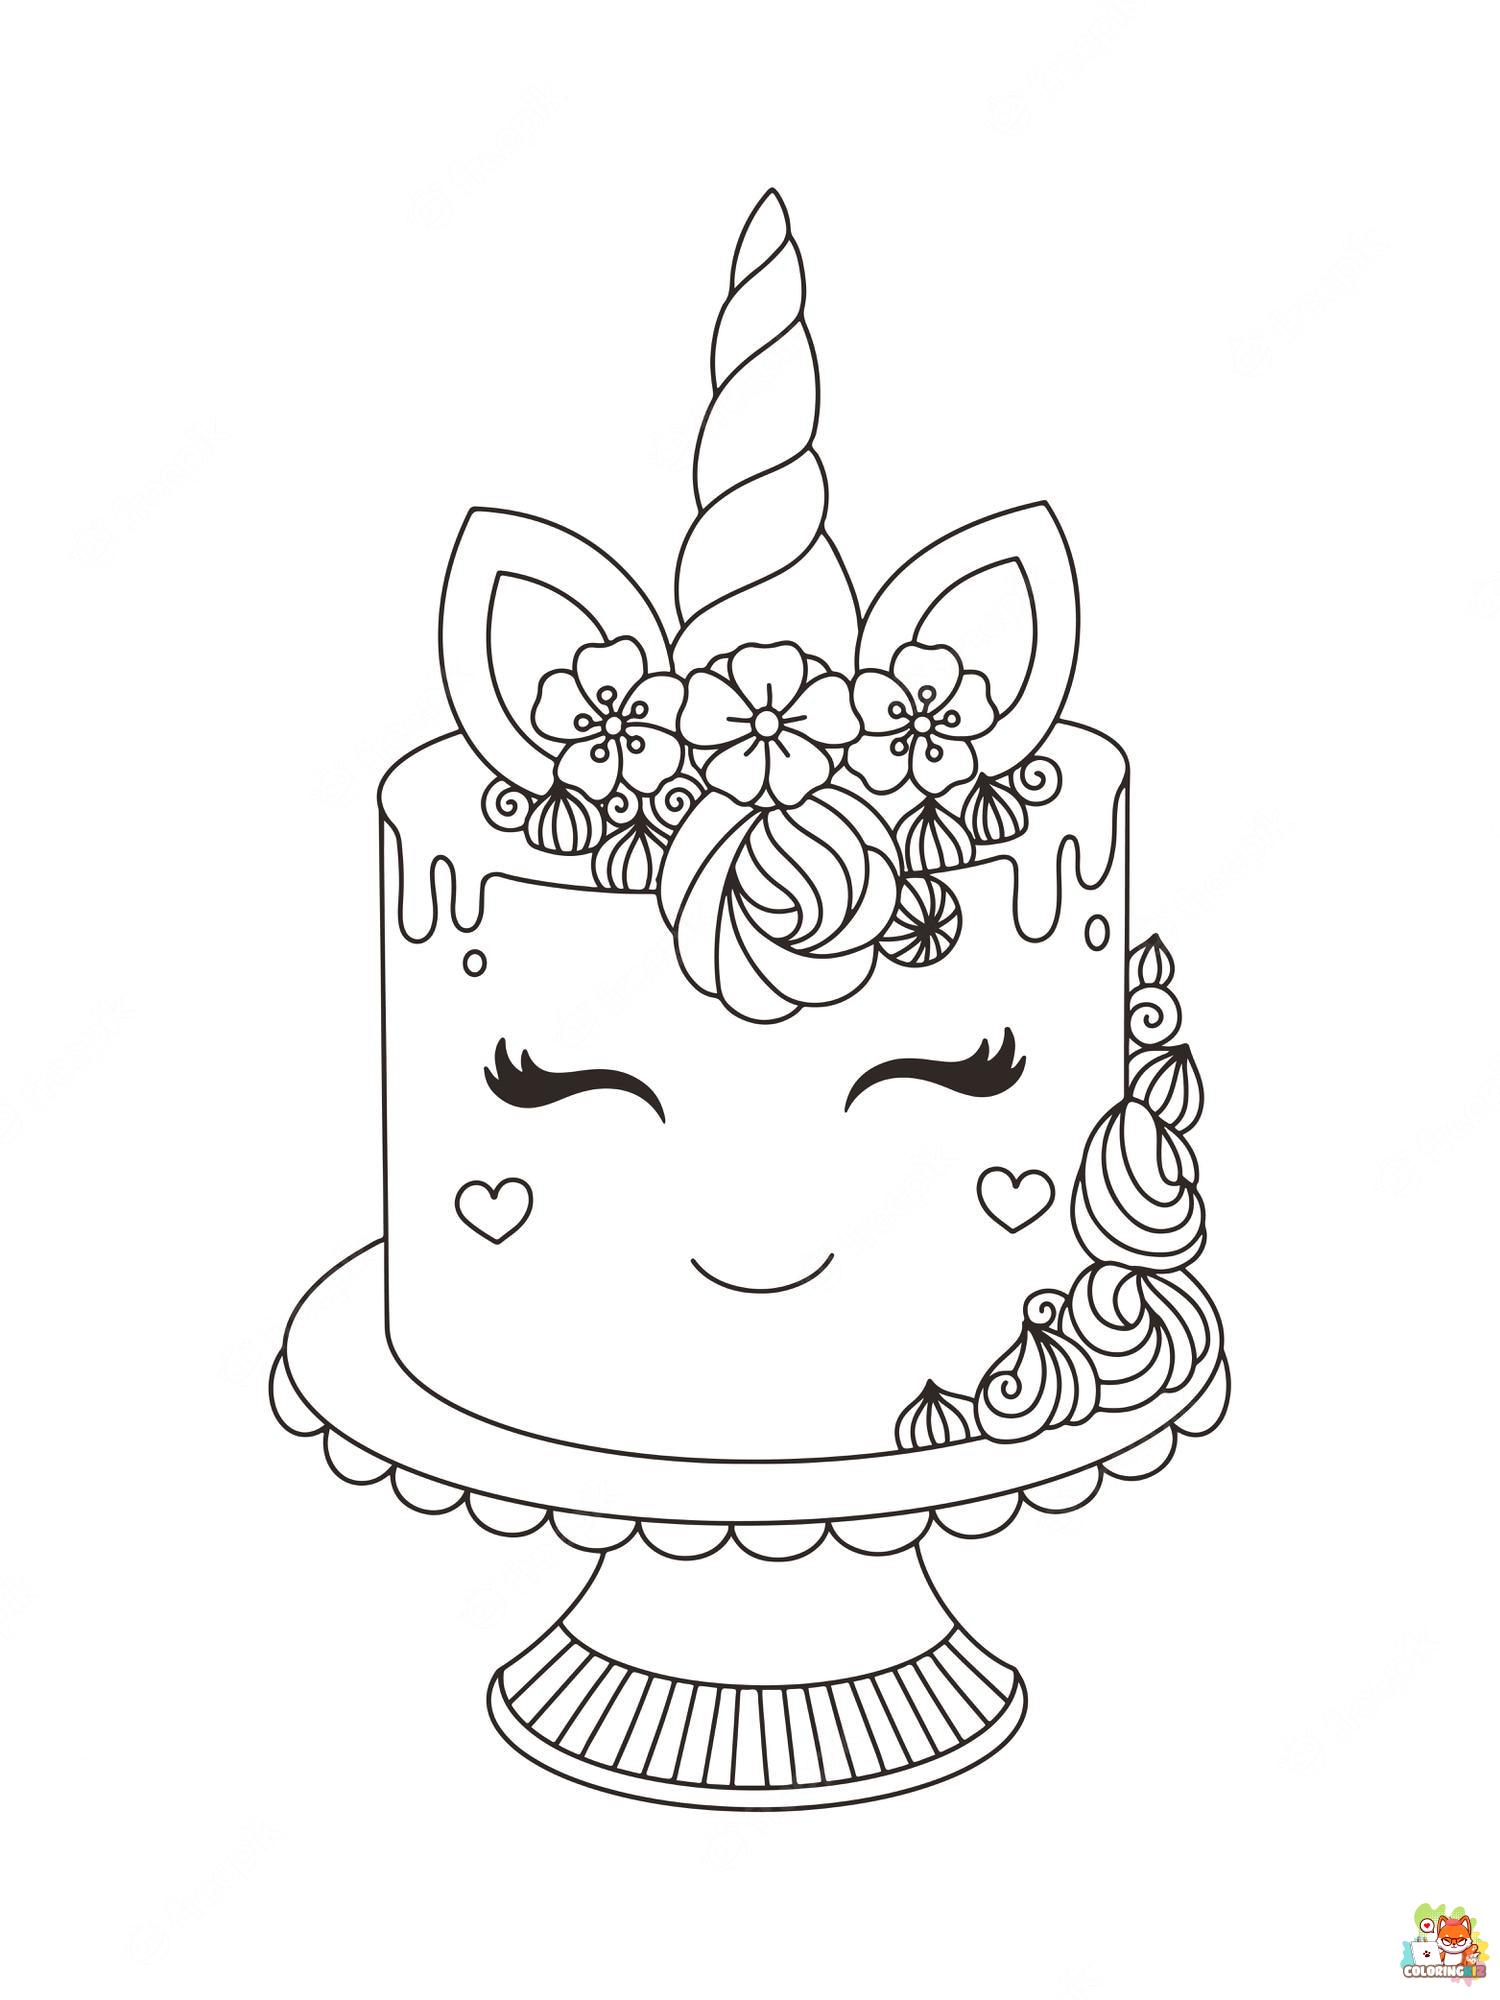 Unicorn Cake Coloring Pages 3